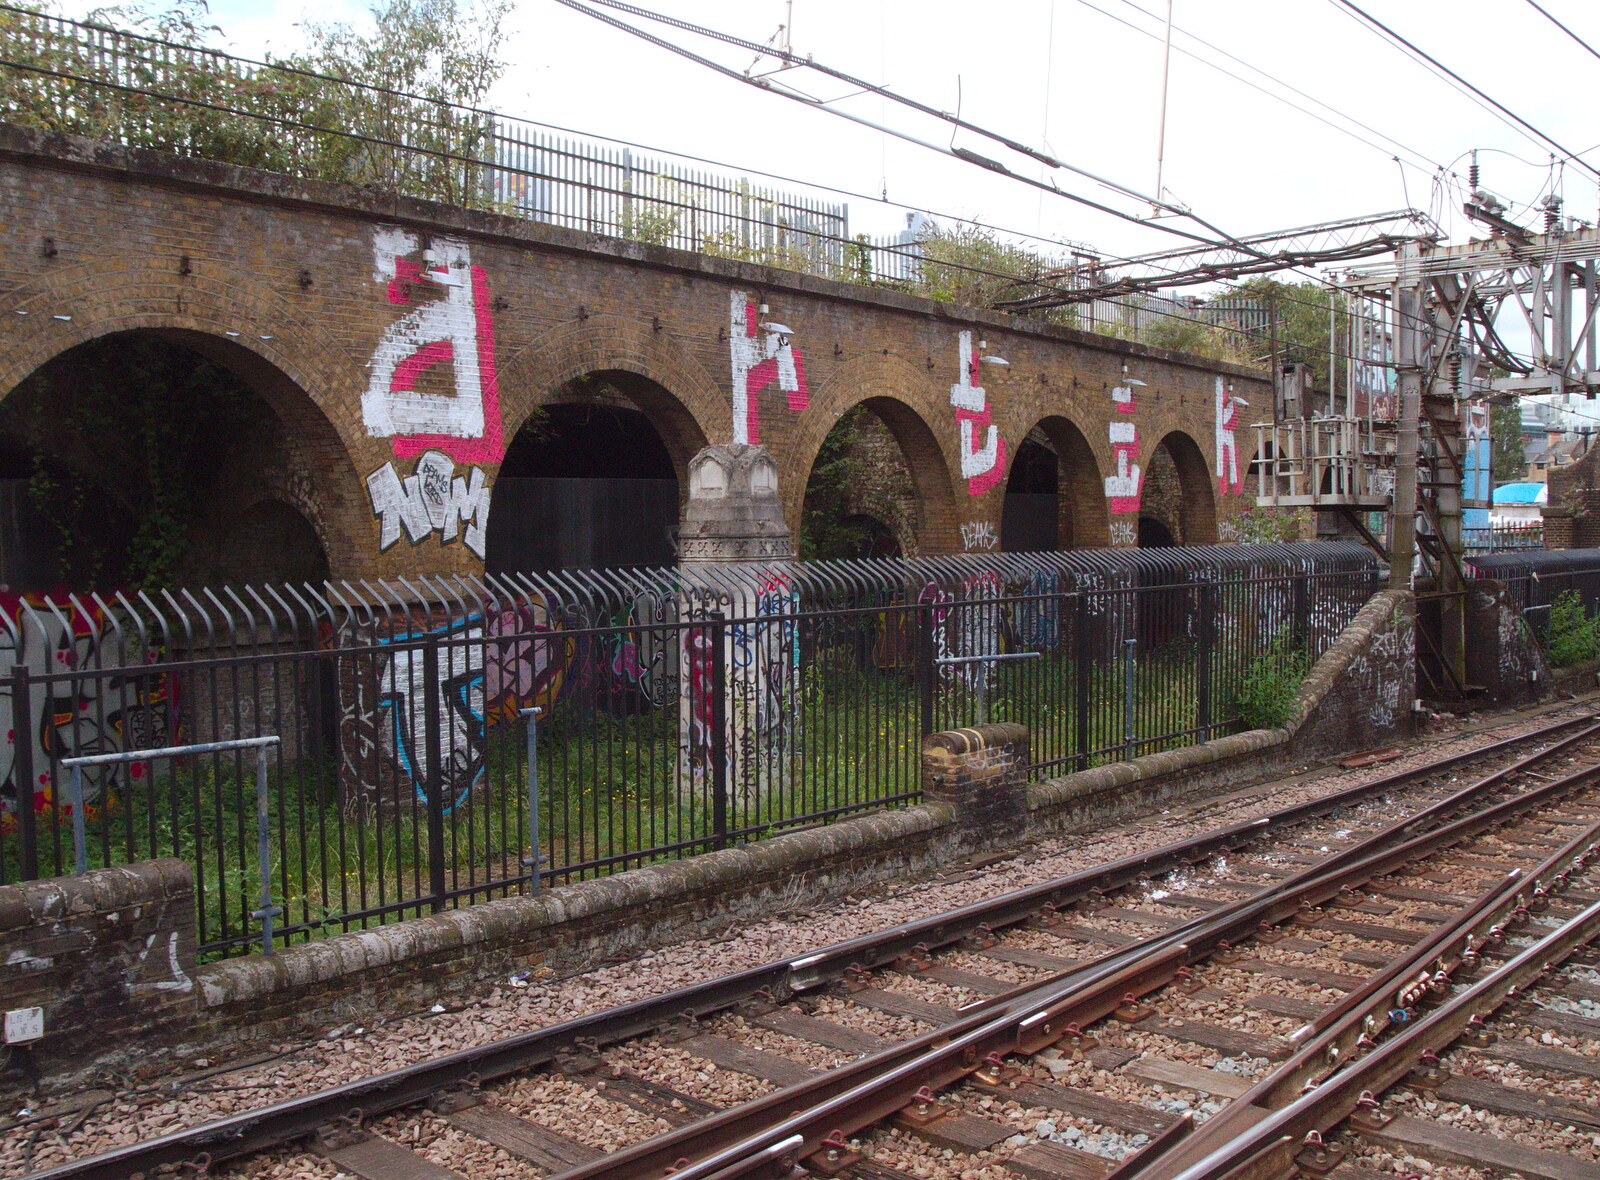 Graffiti letters on the railway arches from The BSCC at Redgrave and Railway Graffiti, Suffolk and London - 7th August 2019